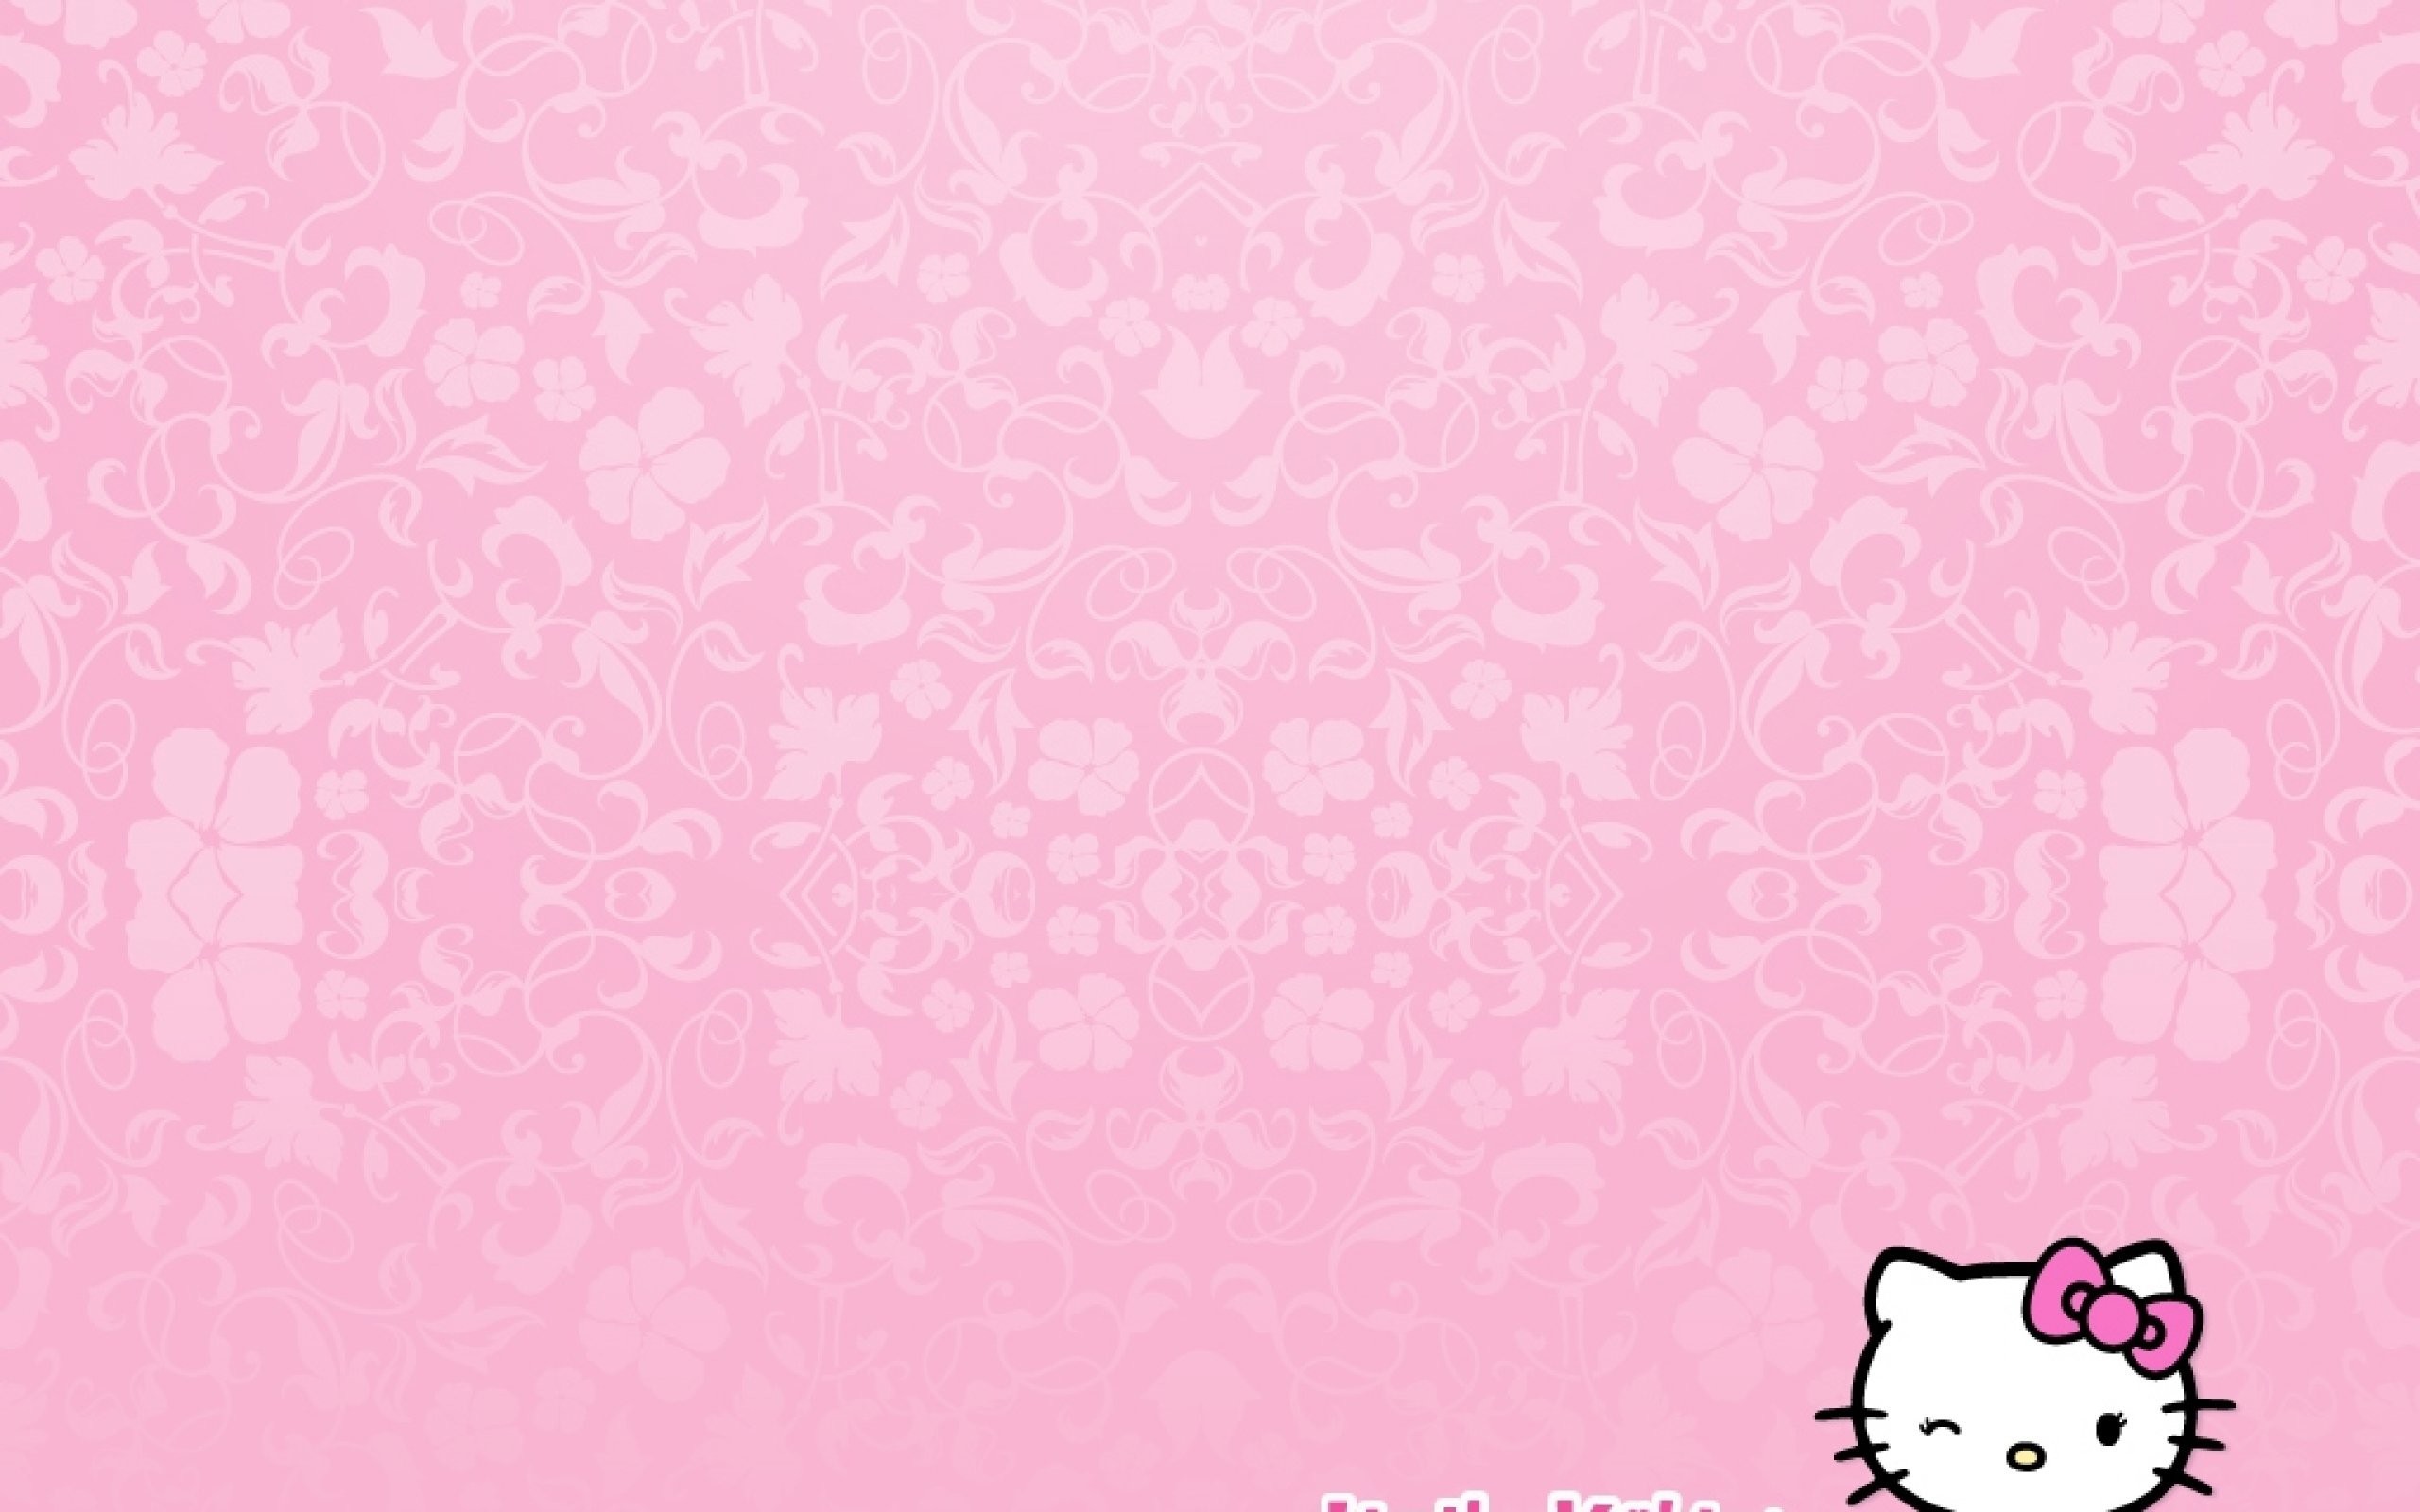 Hello Kitty Desktop Backgrounds 66 Images We have a massive amount of desktop and mobile backgrounds. hello kitty desktop backgrounds 66